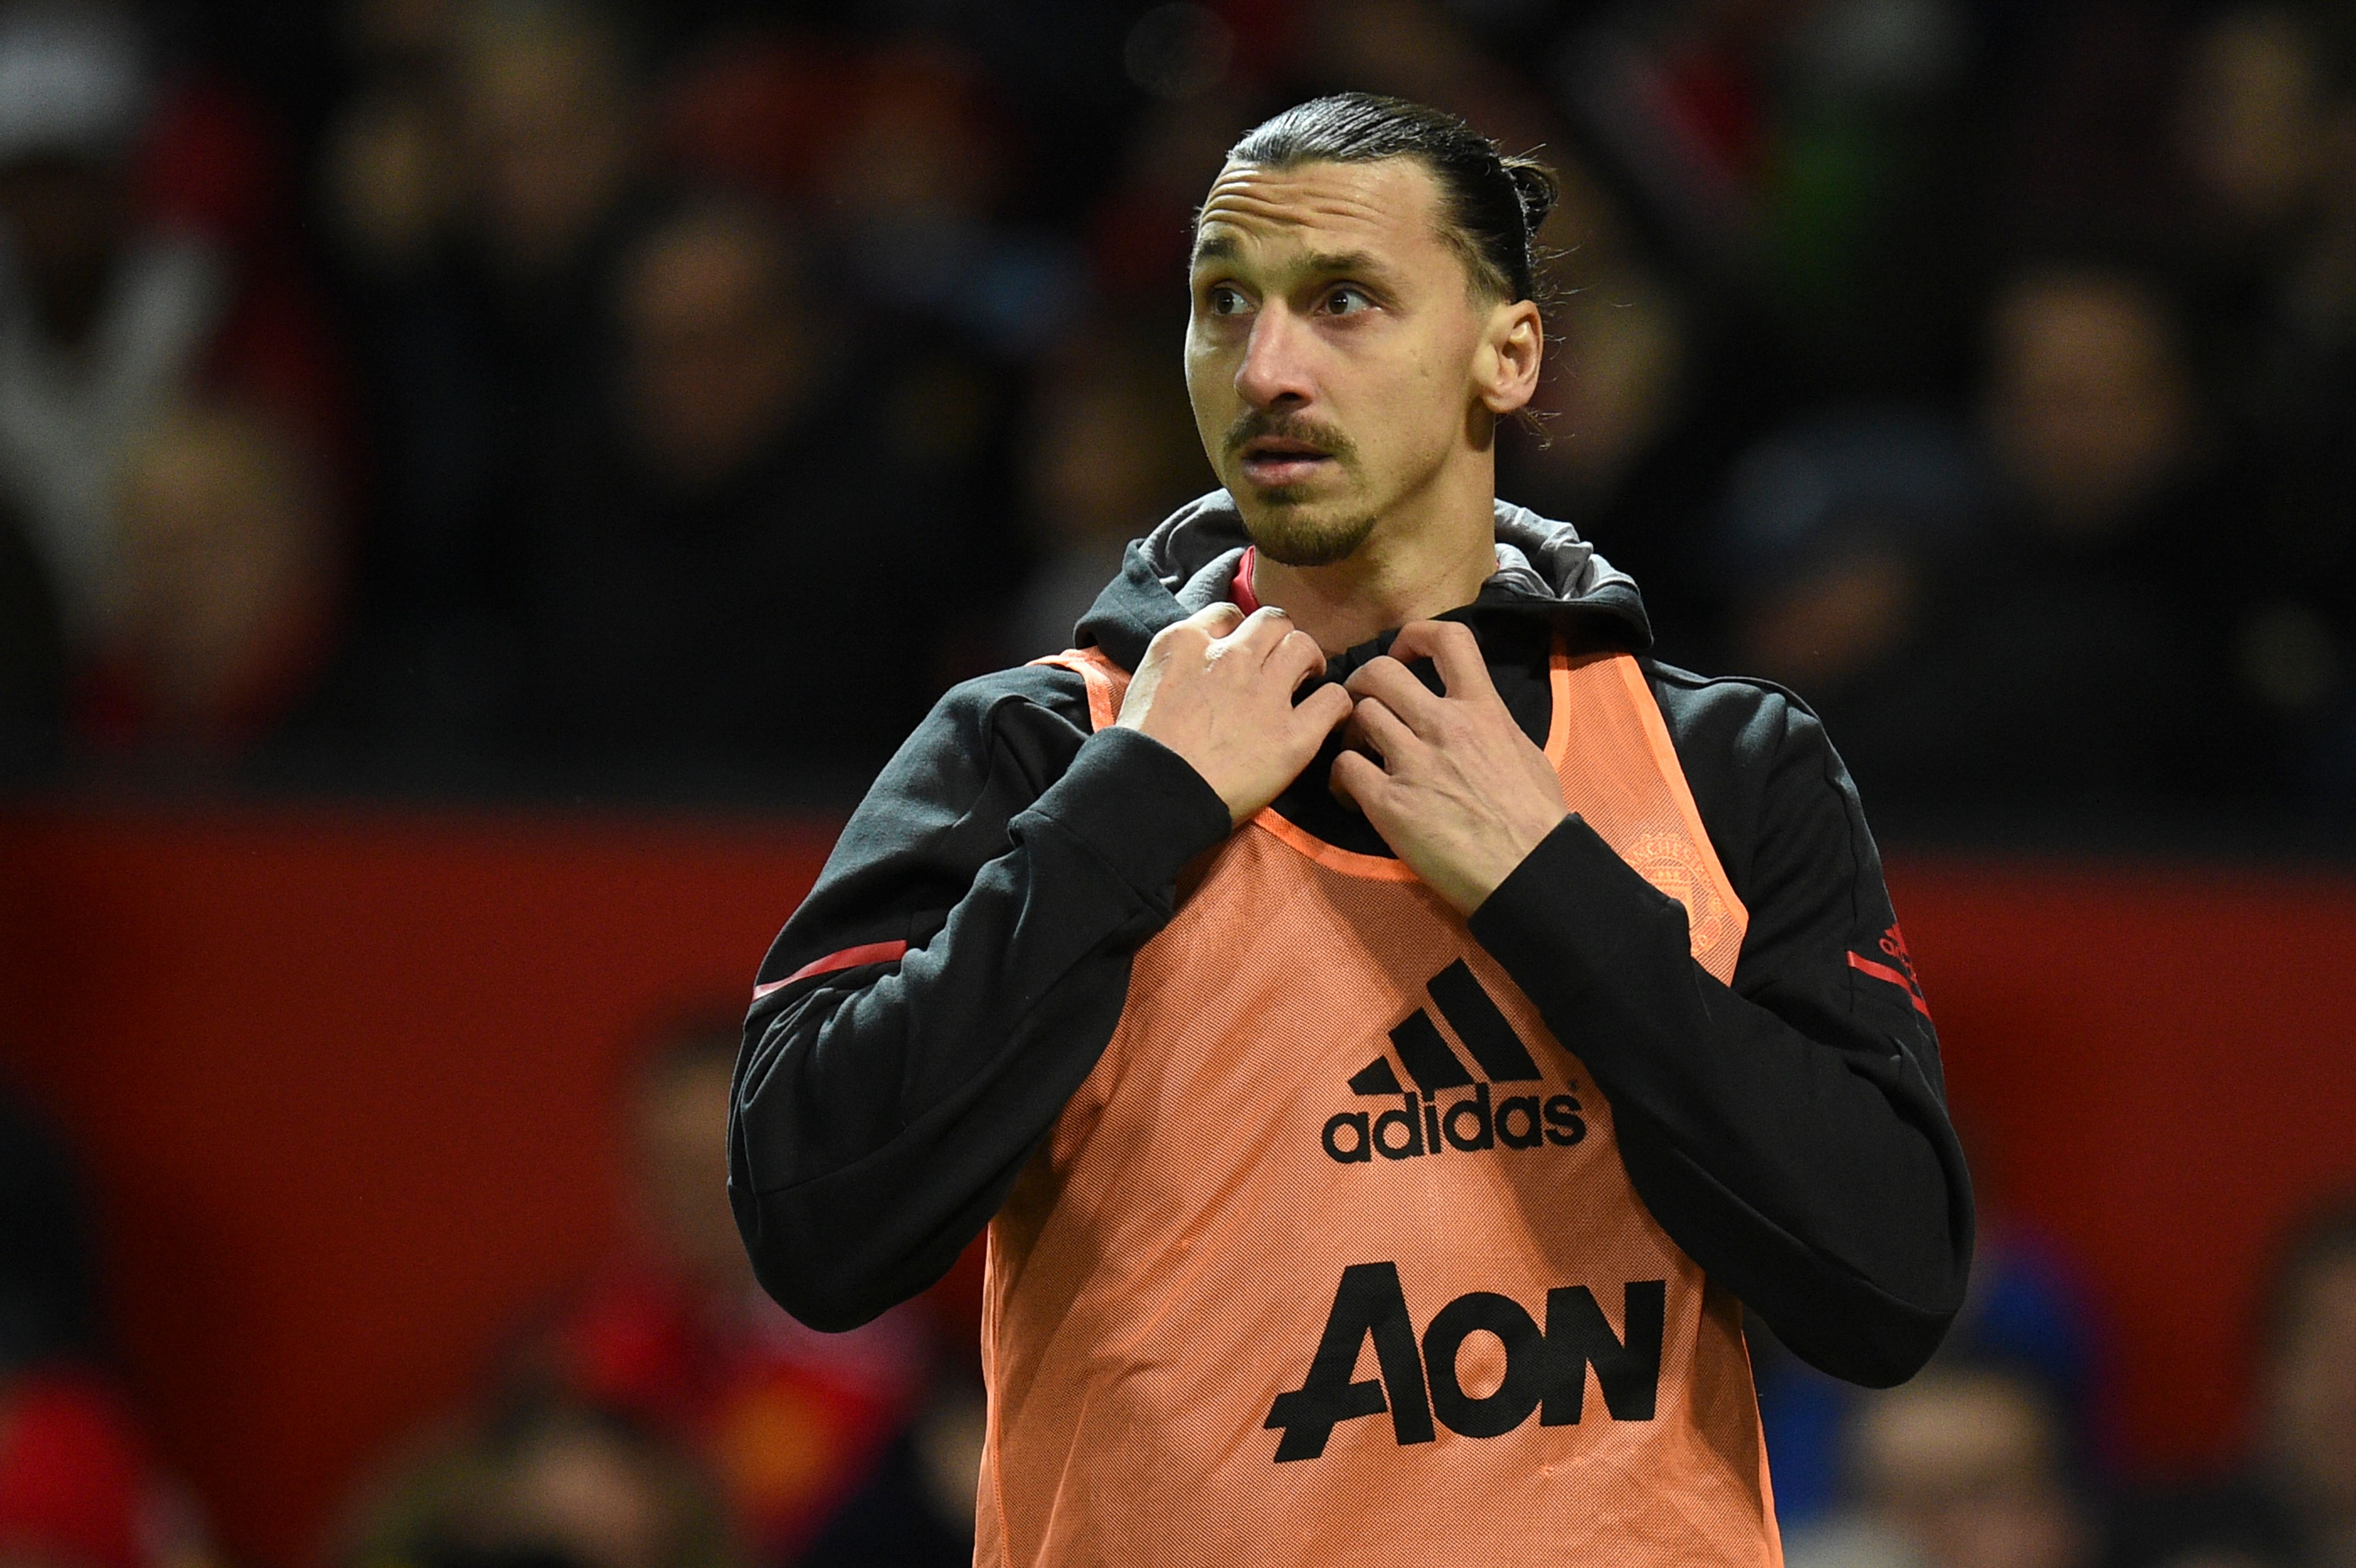 Manchester United's Swedish striker Zlatan Ibrahimovic warms up on the touchline during the English Premier League football match between Manchester United and Newcastle at Old Trafford in Manchester, north west England, on November 18, 2017. / AFP PHOTO / Oli SCARFF / RESTRICTED TO EDITORIAL USE. No use with unauthorized audio, video, data, fixture lists, club/league logos or 'live' services. Online in-match use limited to 75 images, no video emulation. No use in betting, games or single club/league/player publications.  /         (Photo credit should read OLI SCARFF/AFP/Getty Images)